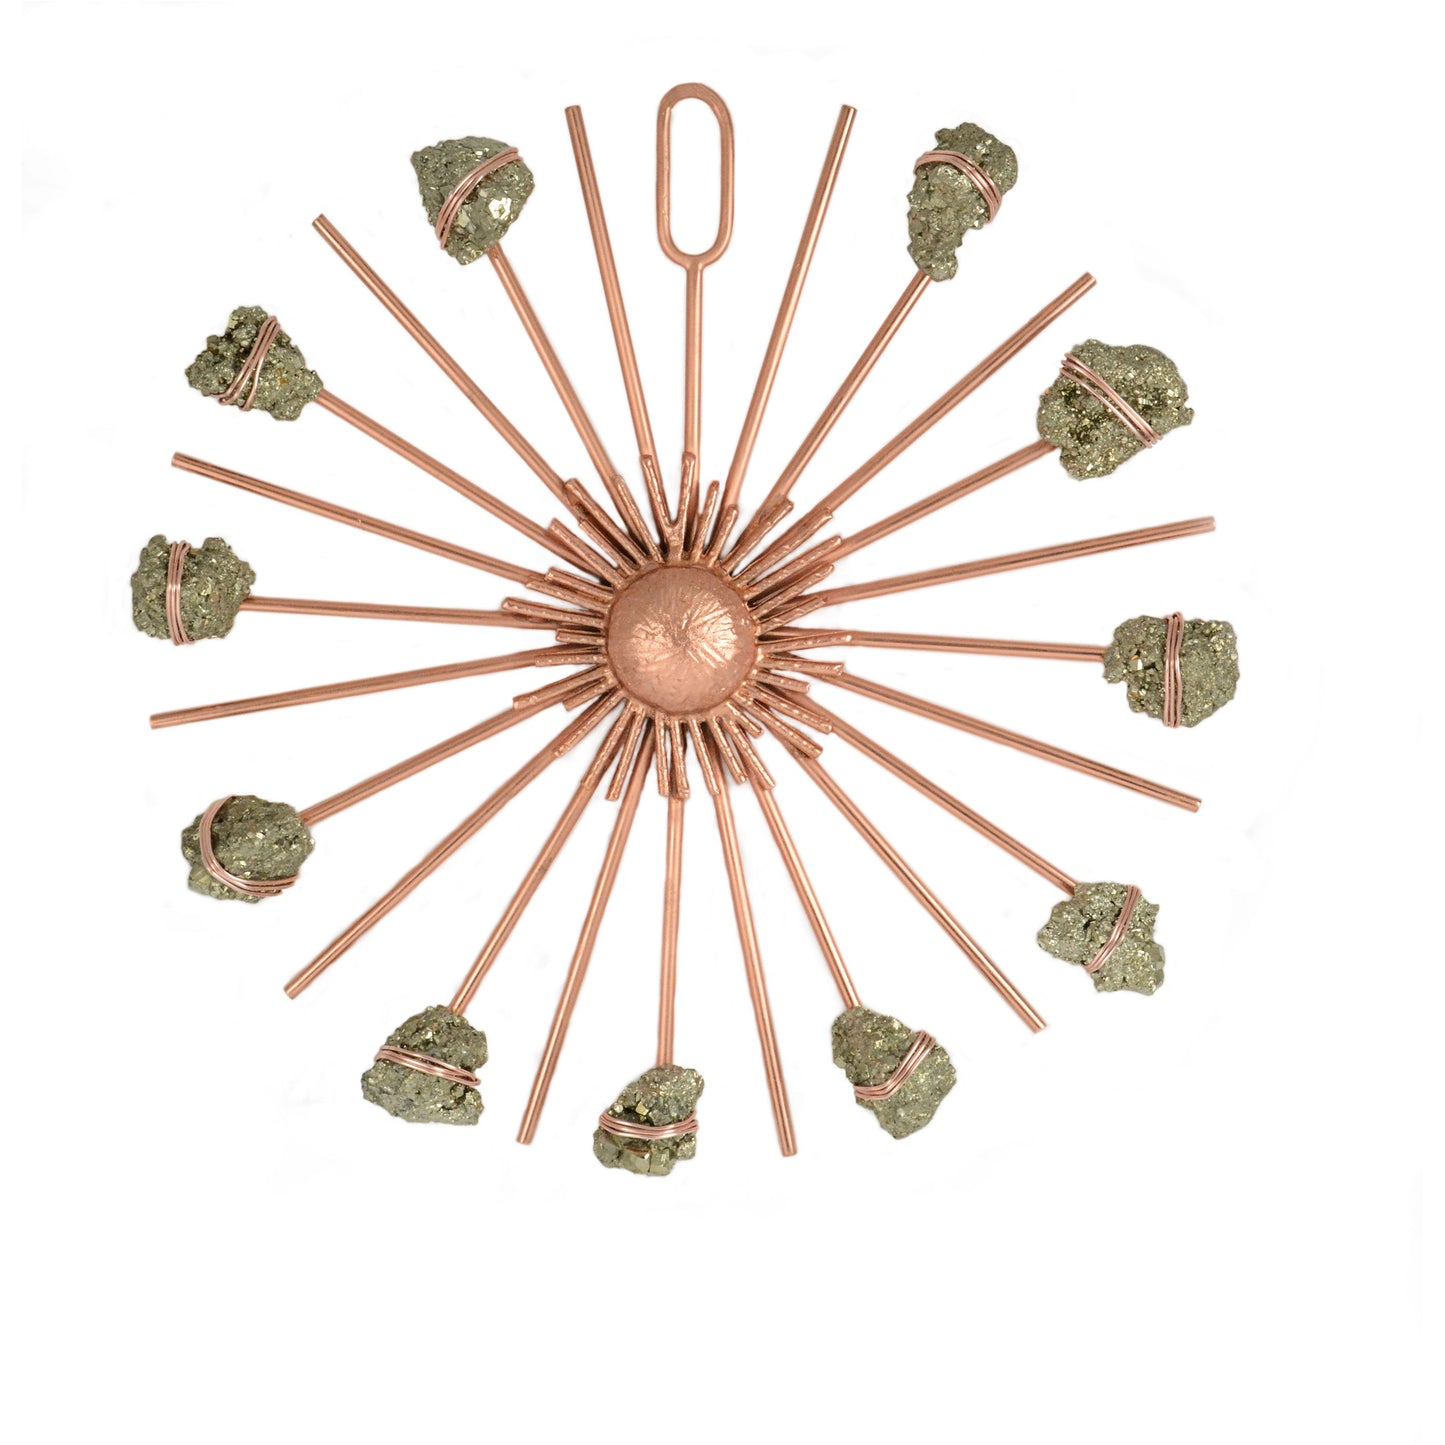 Sunburst Healing Crystal Grid Rose Gold Pyrite by Ariana Ost